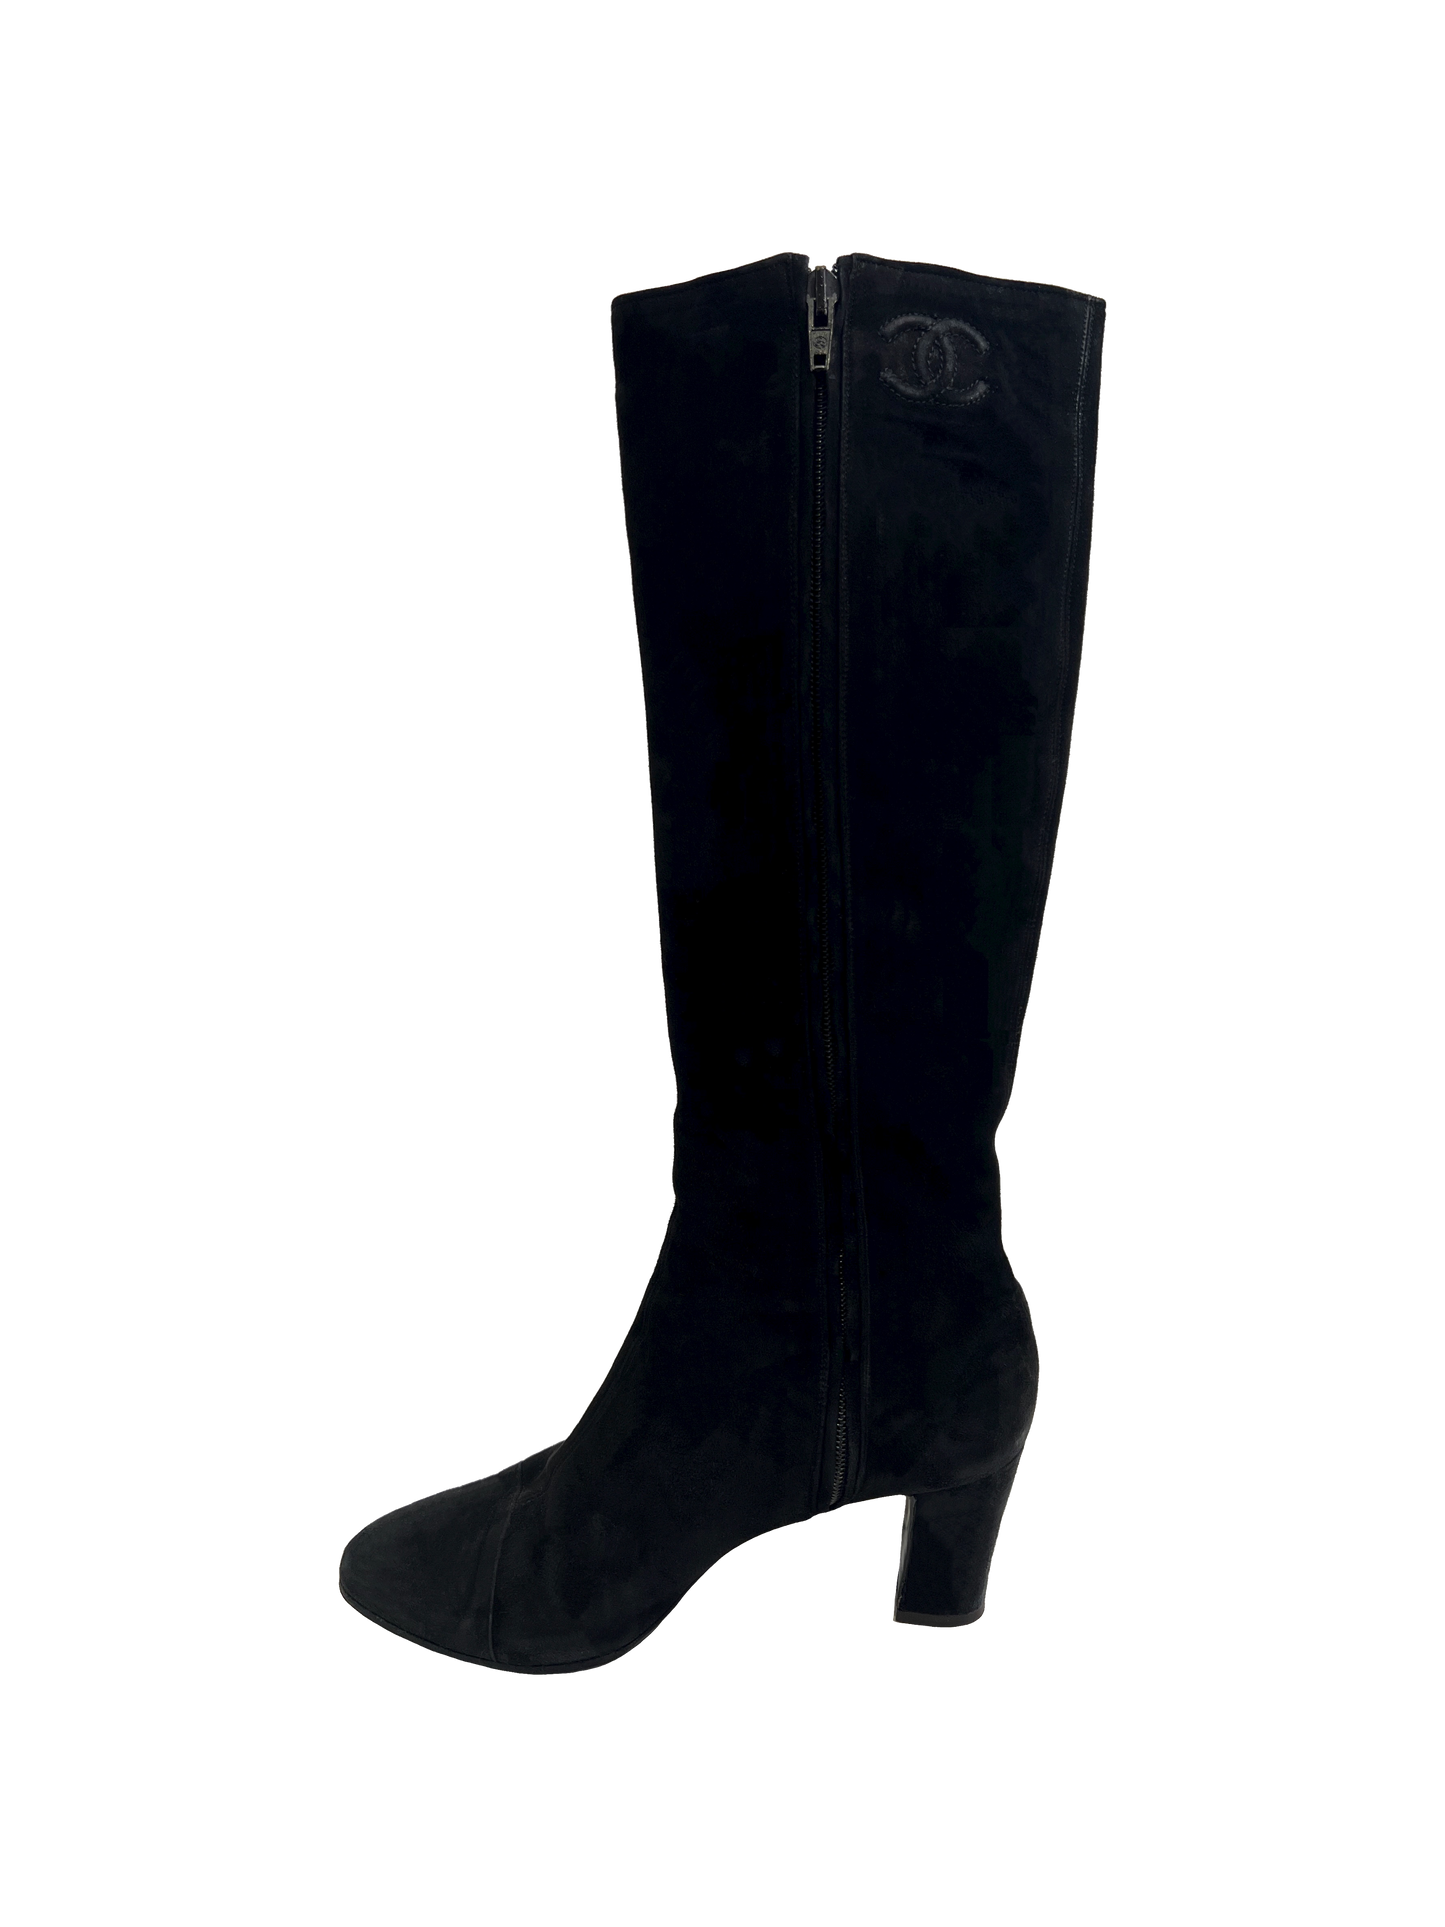 Chanel Knee High Boots, IT 37.5